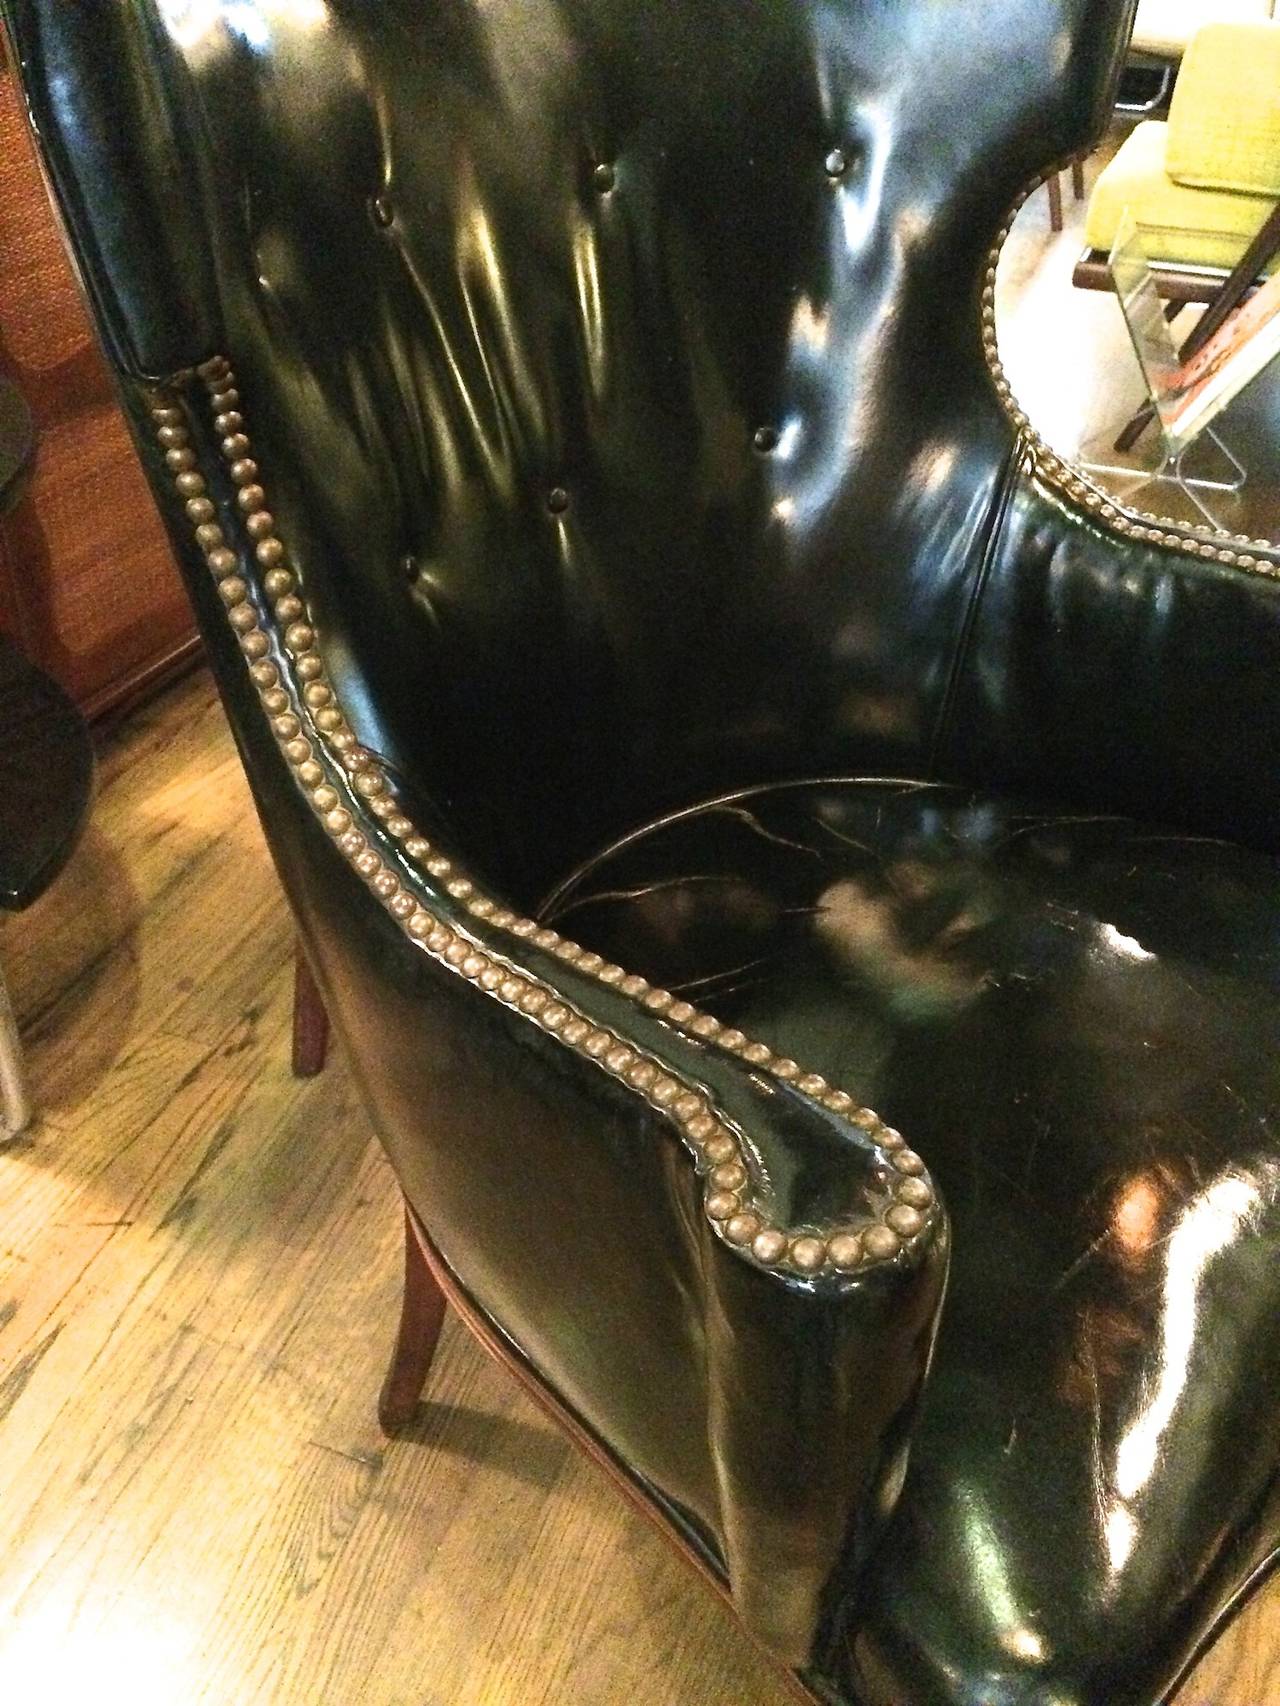 Mid-20th Century Pair of Leather Wingback Chairs